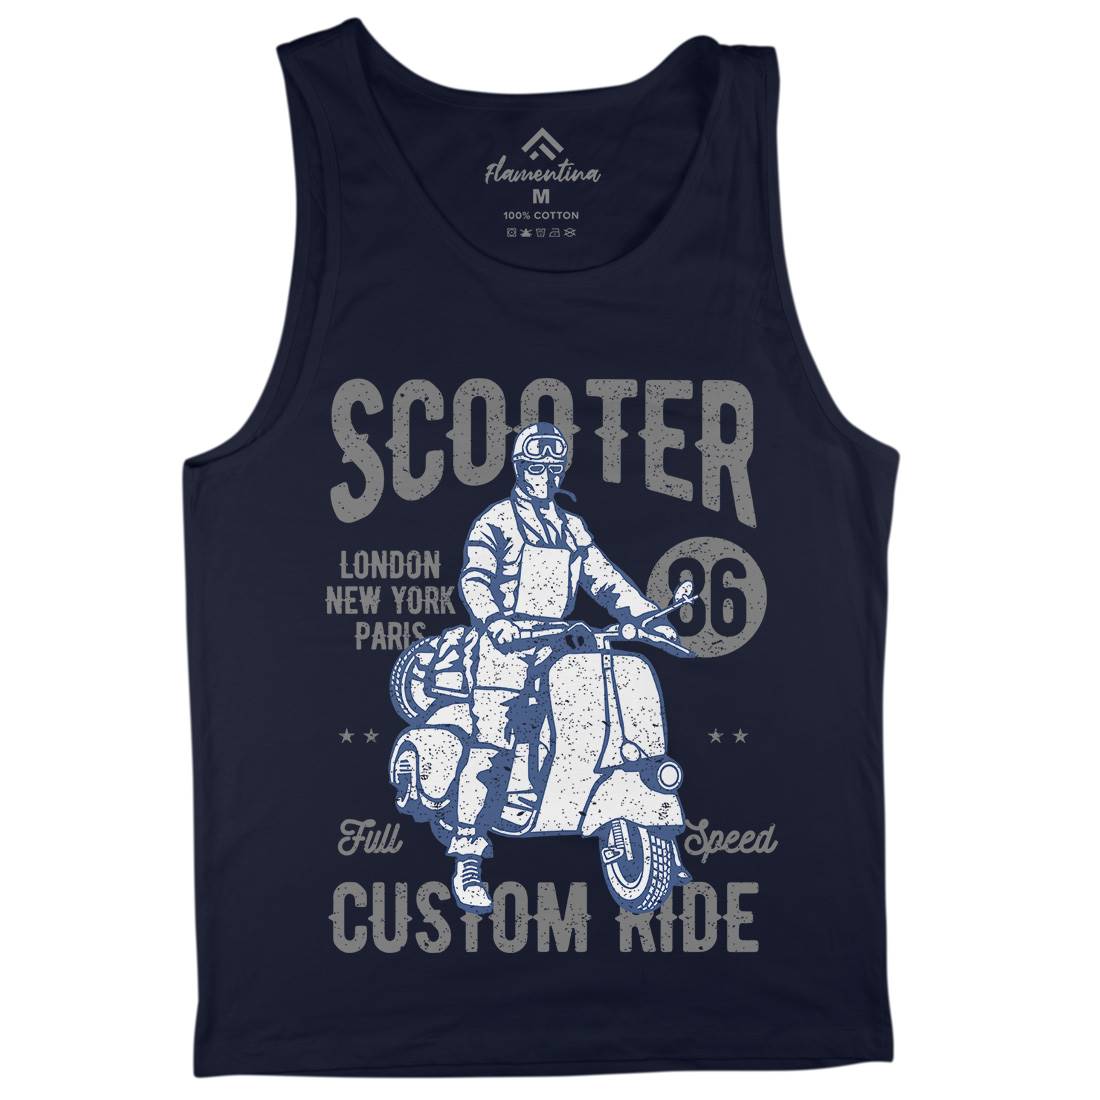 Vintage Scooter Mens Tank Top Vest Motorcycles A787